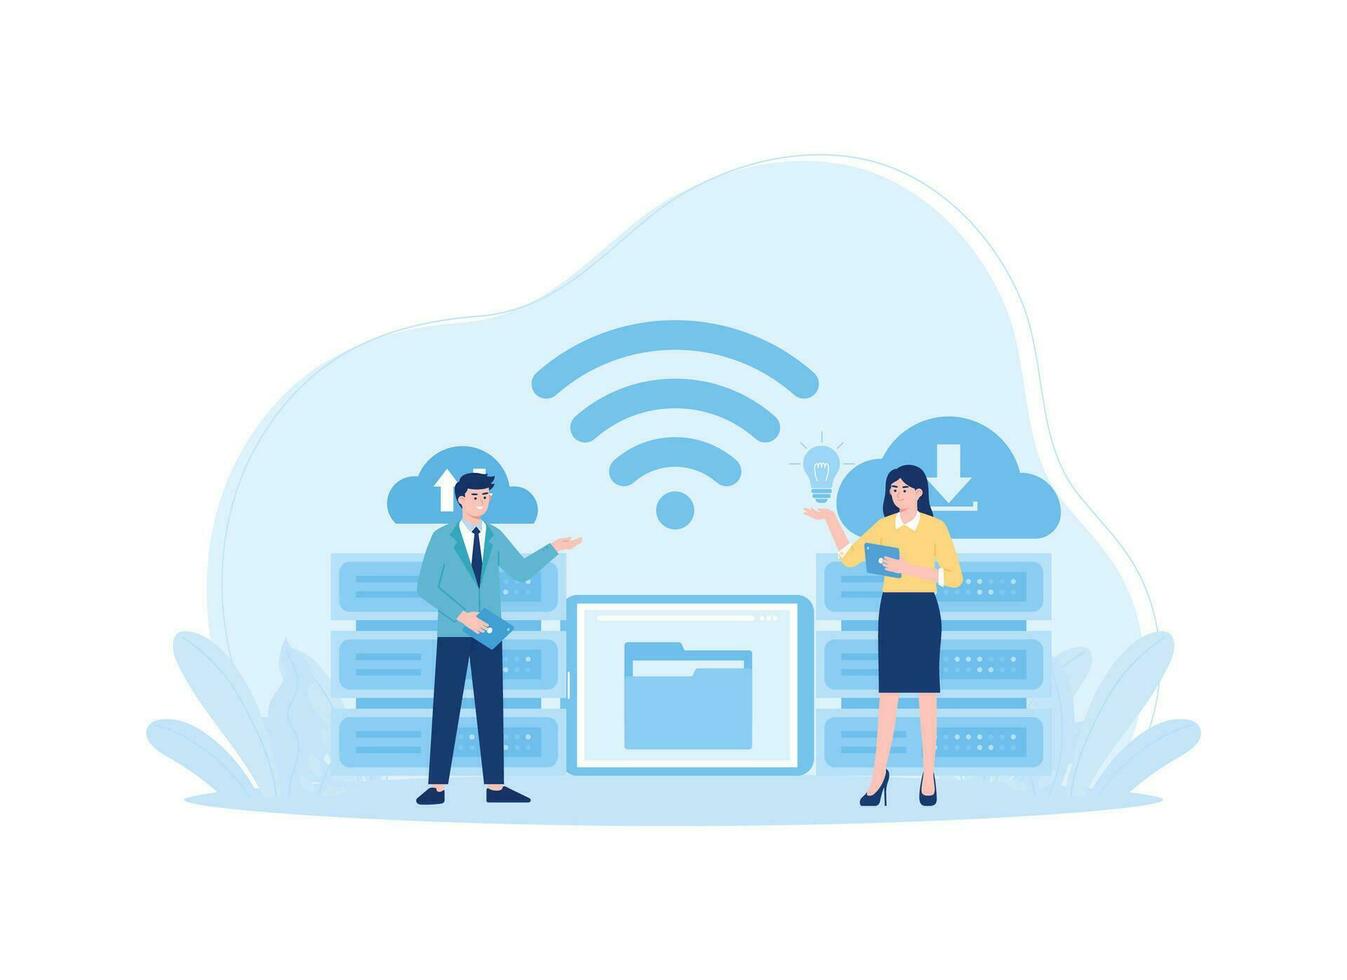 Two characters with cloud storage icon concept flat illustration vector